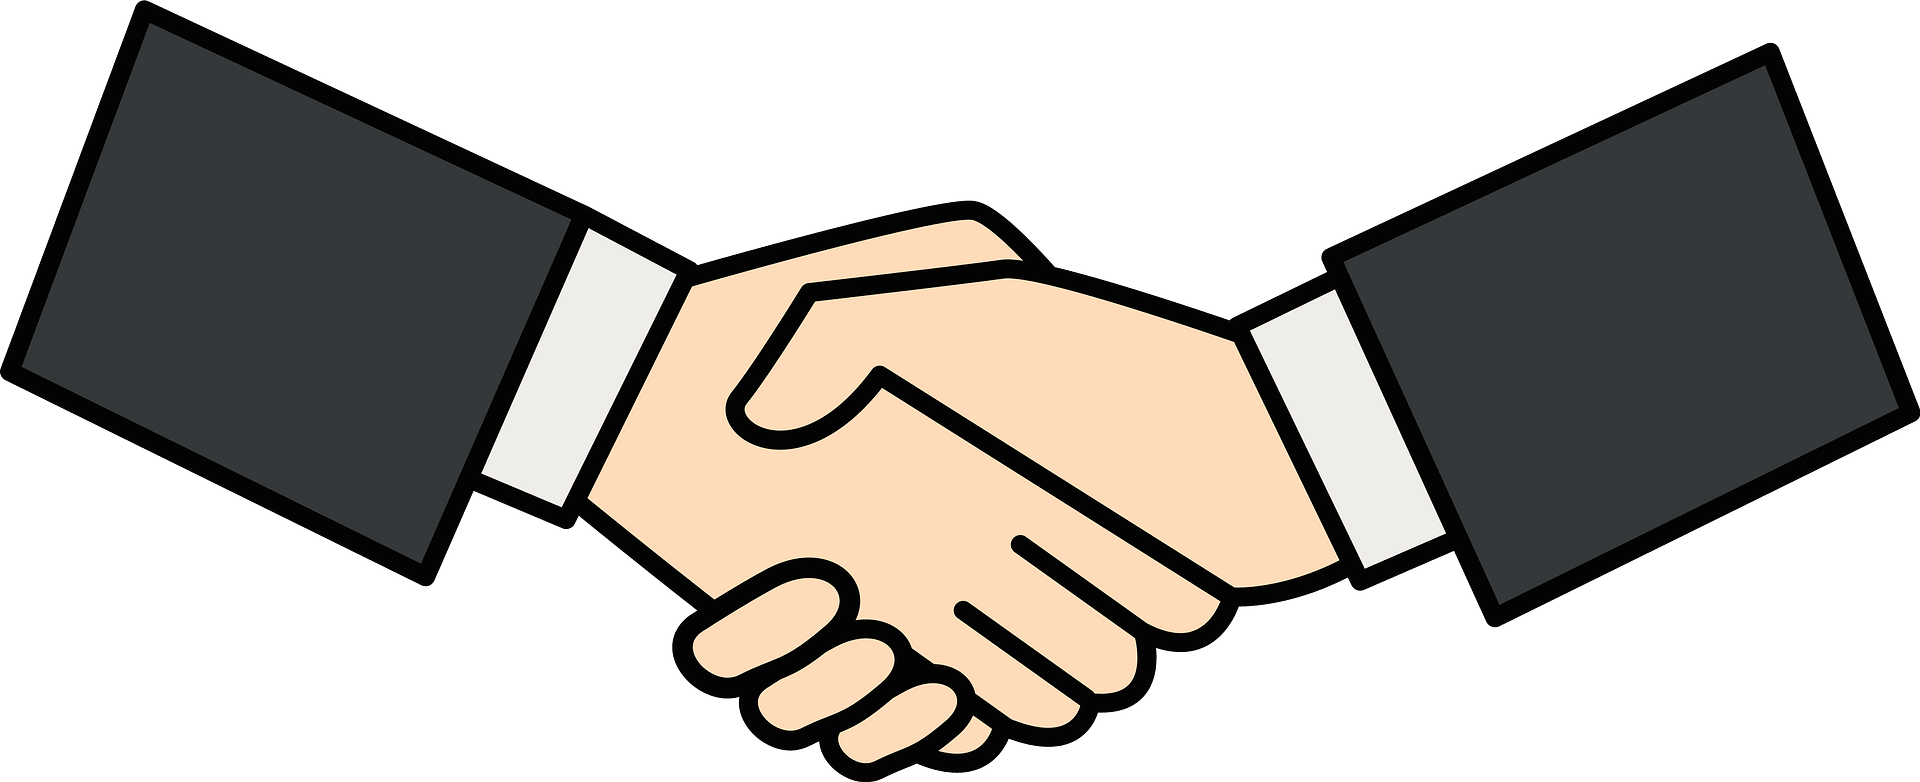 Photos Handshake Vector Business PNG Image High Quality PNG Image